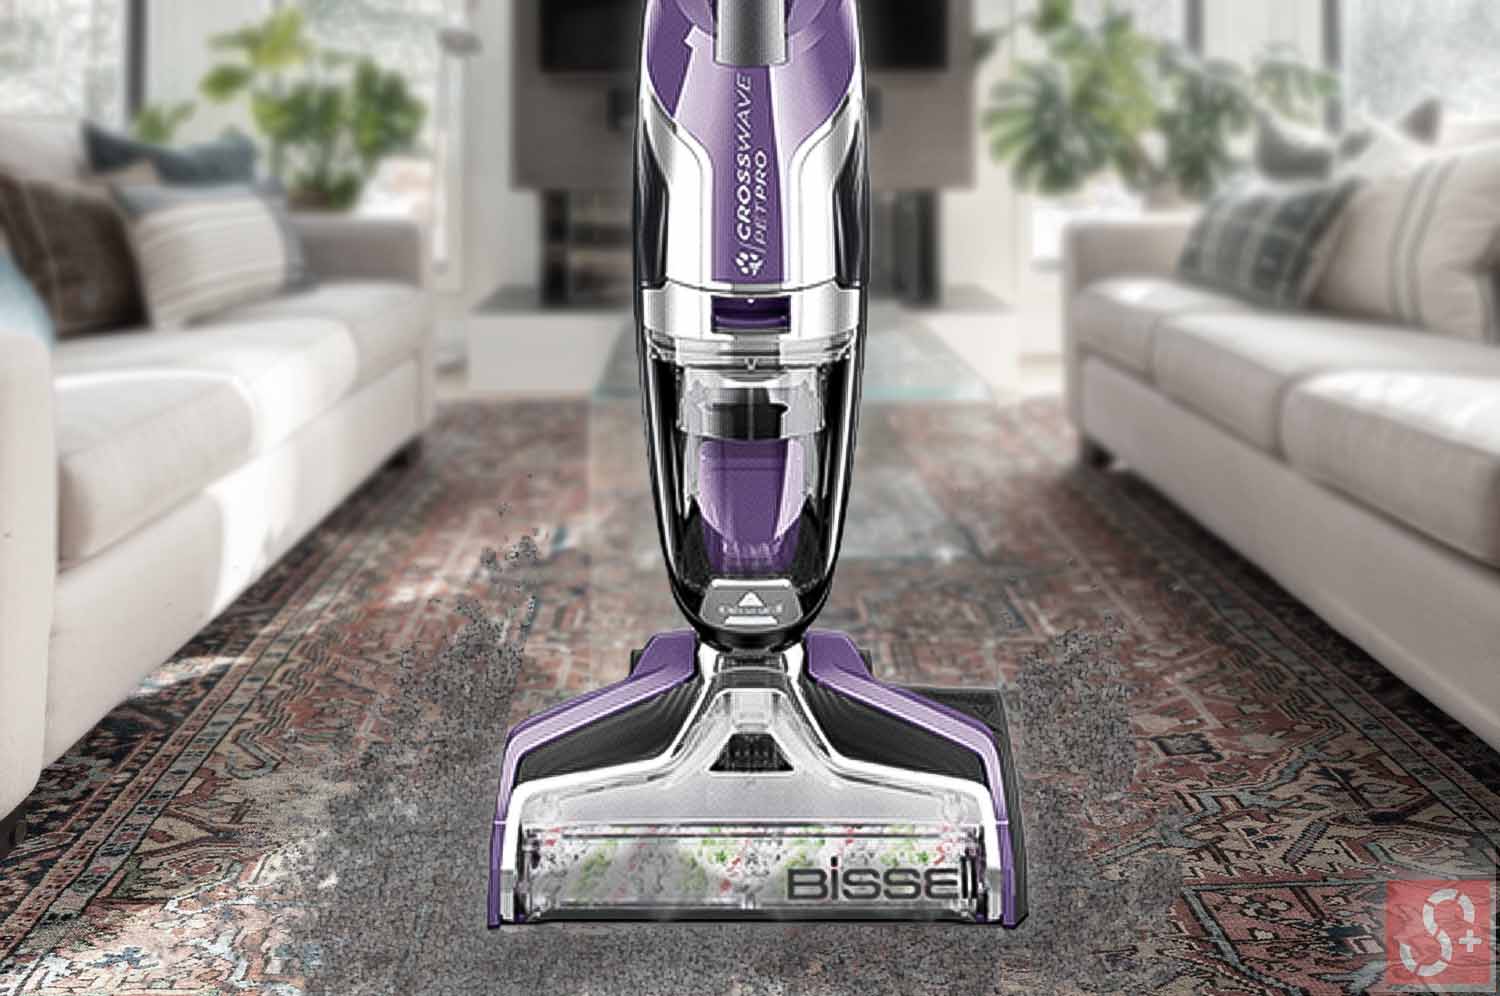 Bissell Crosswave Vacuuming Up Dirt from Carpet